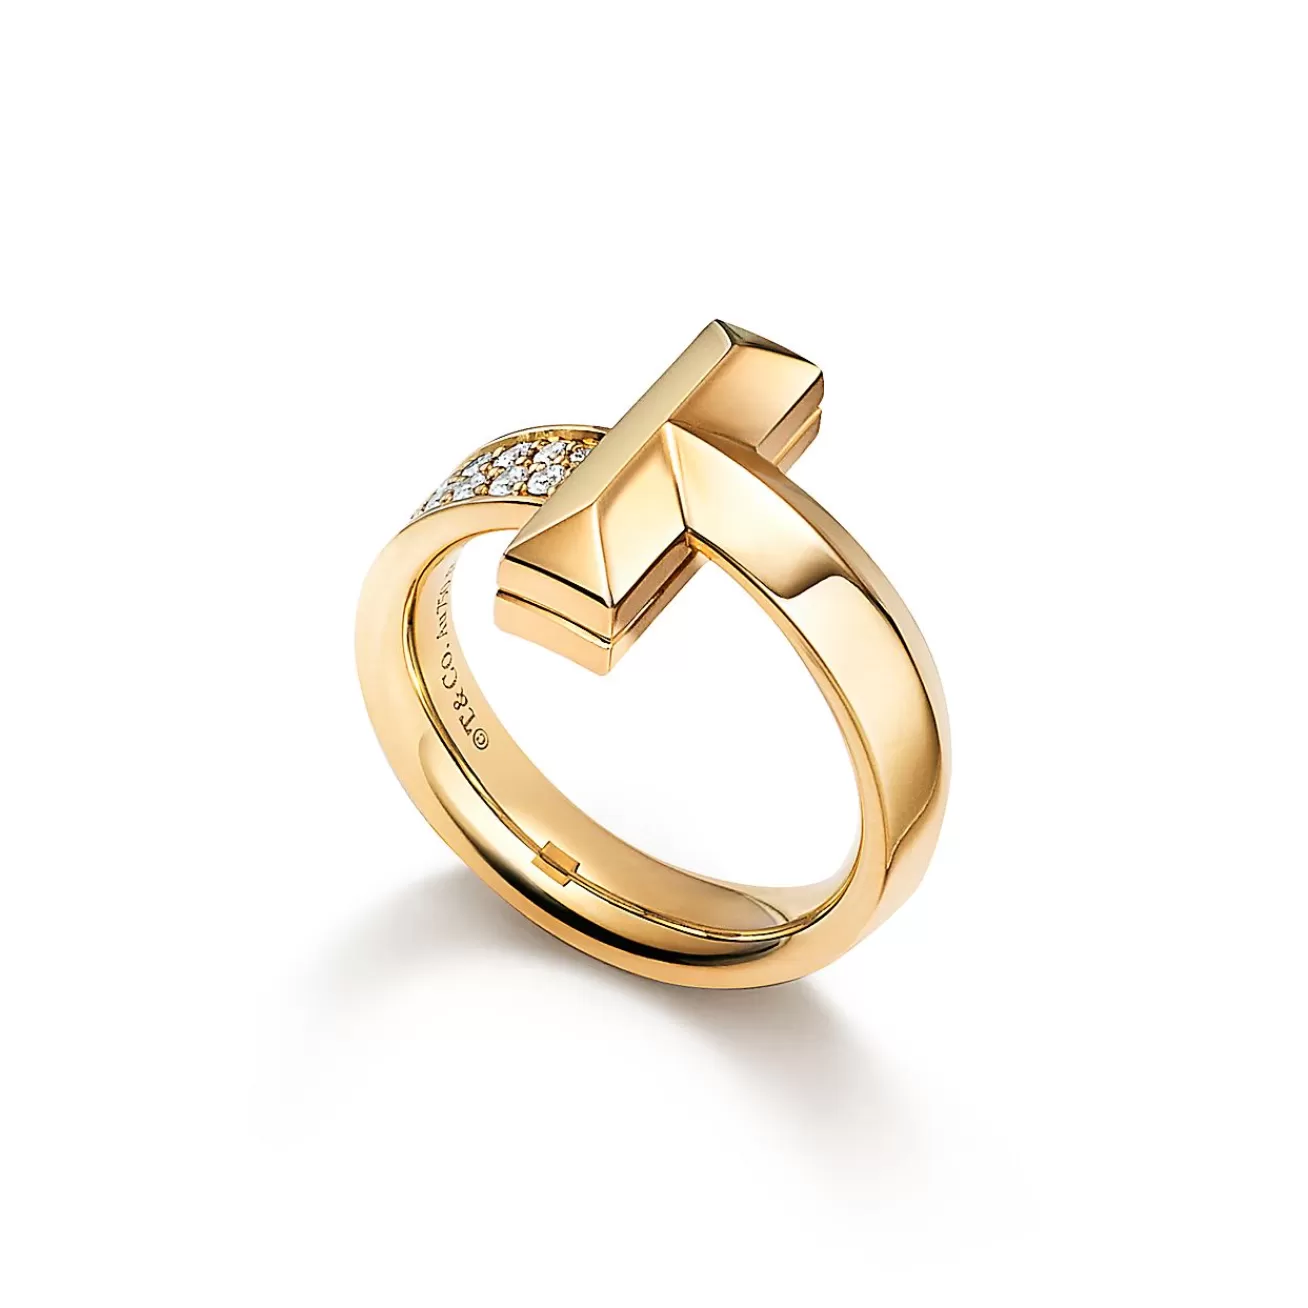 Tiffany & Co. Tiffany T T1 Ring in Yellow Gold with Diamonds, 4.5 mm Wide | ^ Rings | Gold Jewelry